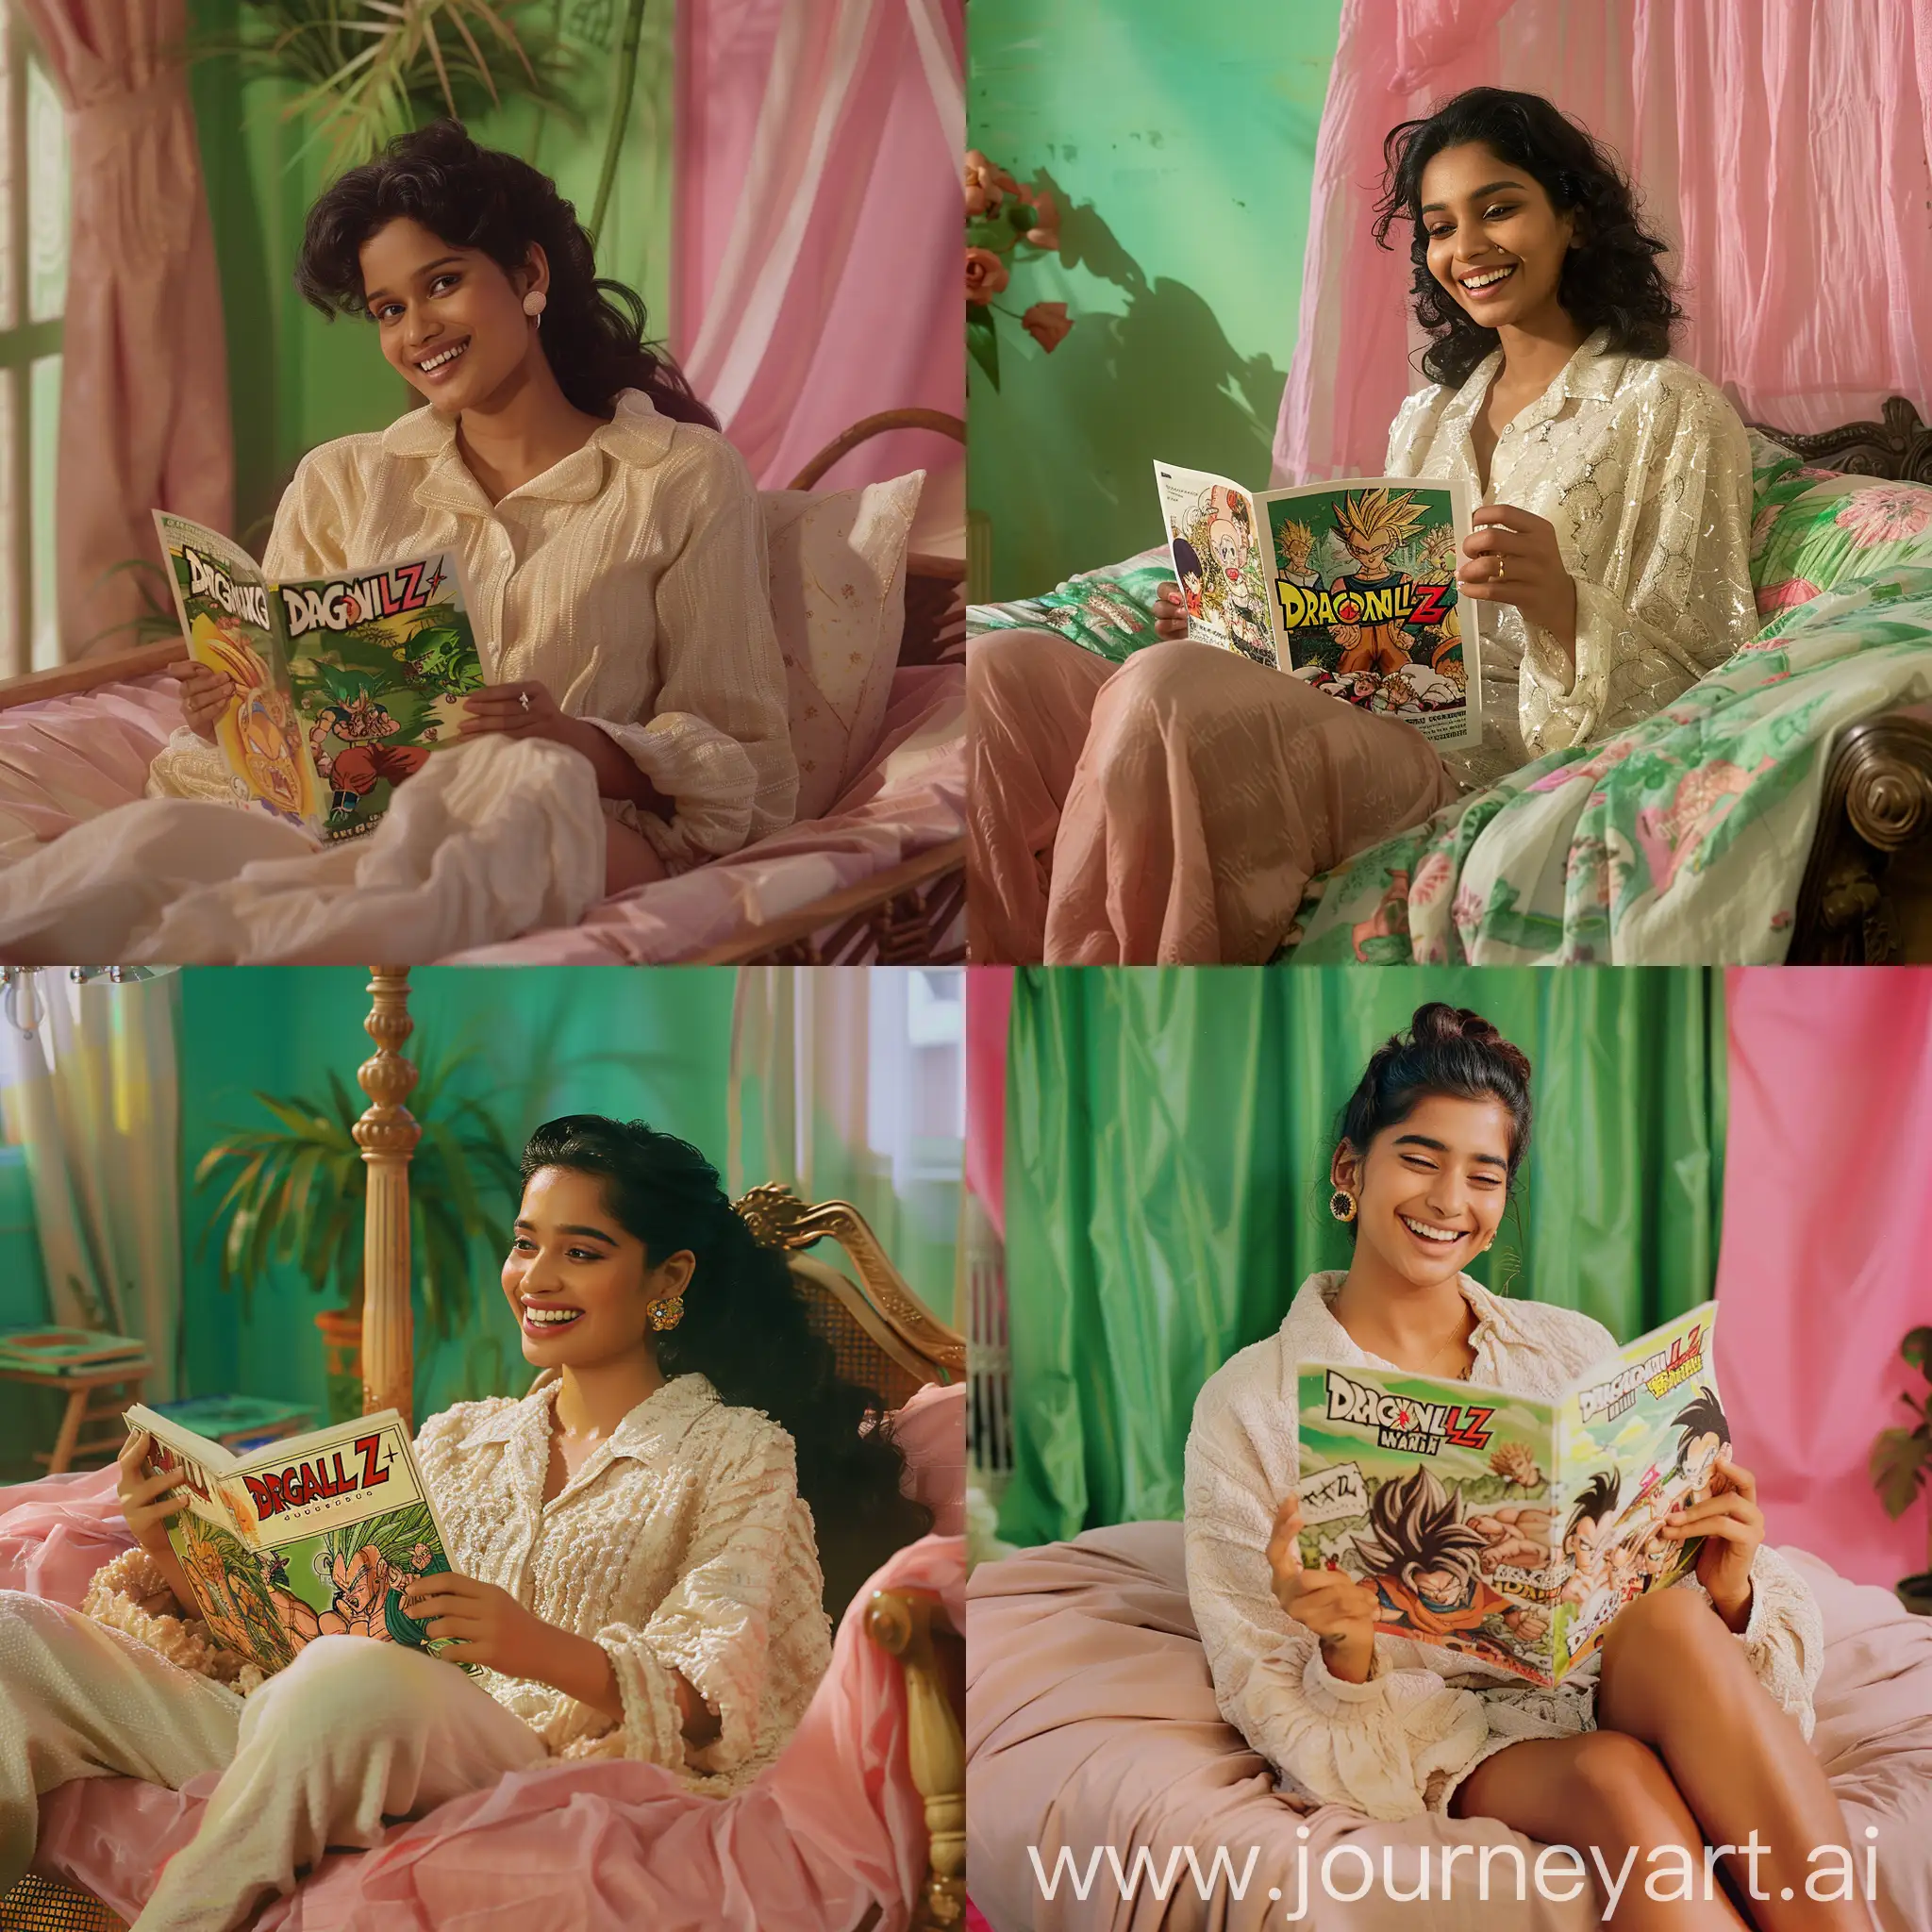 Create a stunning intricately detailed cinematic baroque photographic visual of a theme "a very beautiful Navya Nair relaxing on a love bed reading Dragon Ball Z comics" clad in a creamy textured shirt, smiling cute and playful", picturesque, intricately detailed, photorrealistic scene, A very well crafted, detailed, subtle smooth color tone, green barbie world pink background, waist shot, half body shot, wide angle lens